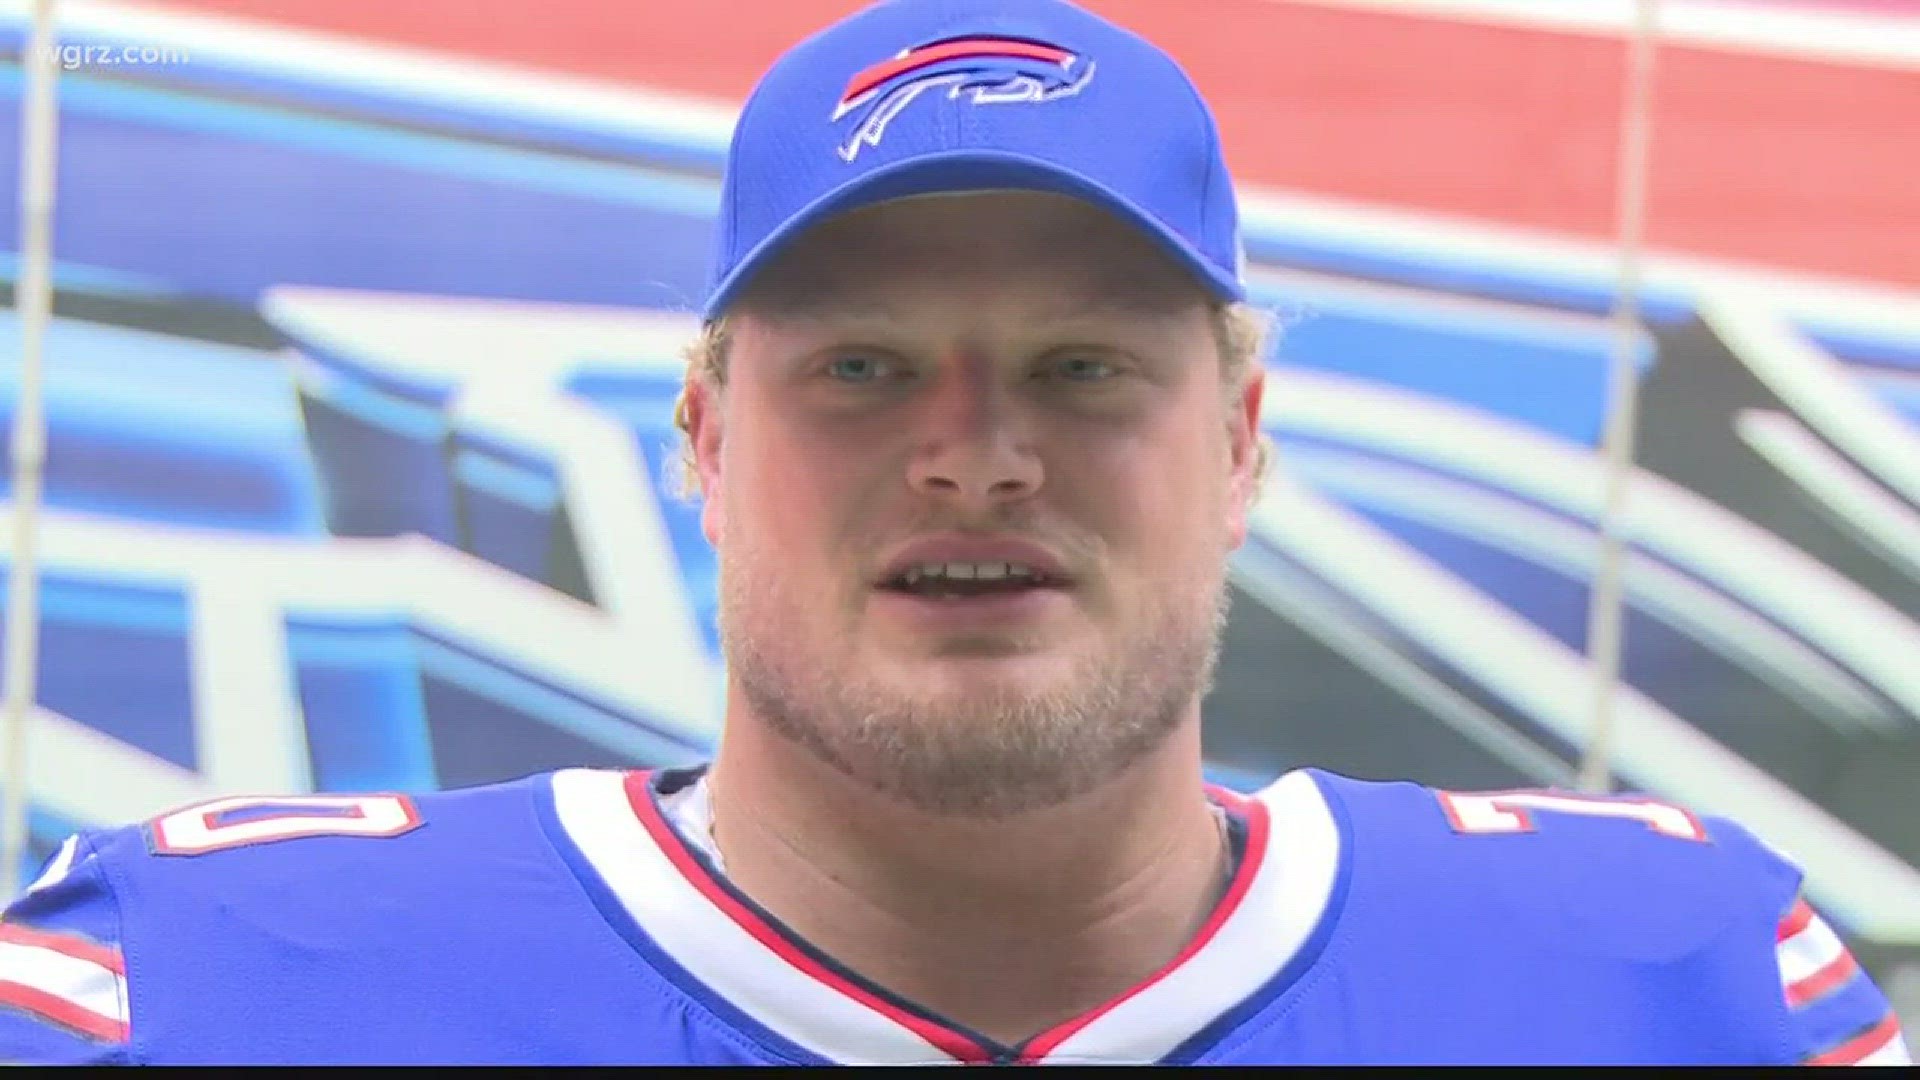 REPORT: Bills' center Eric Wood suffered a career-ending neck injury